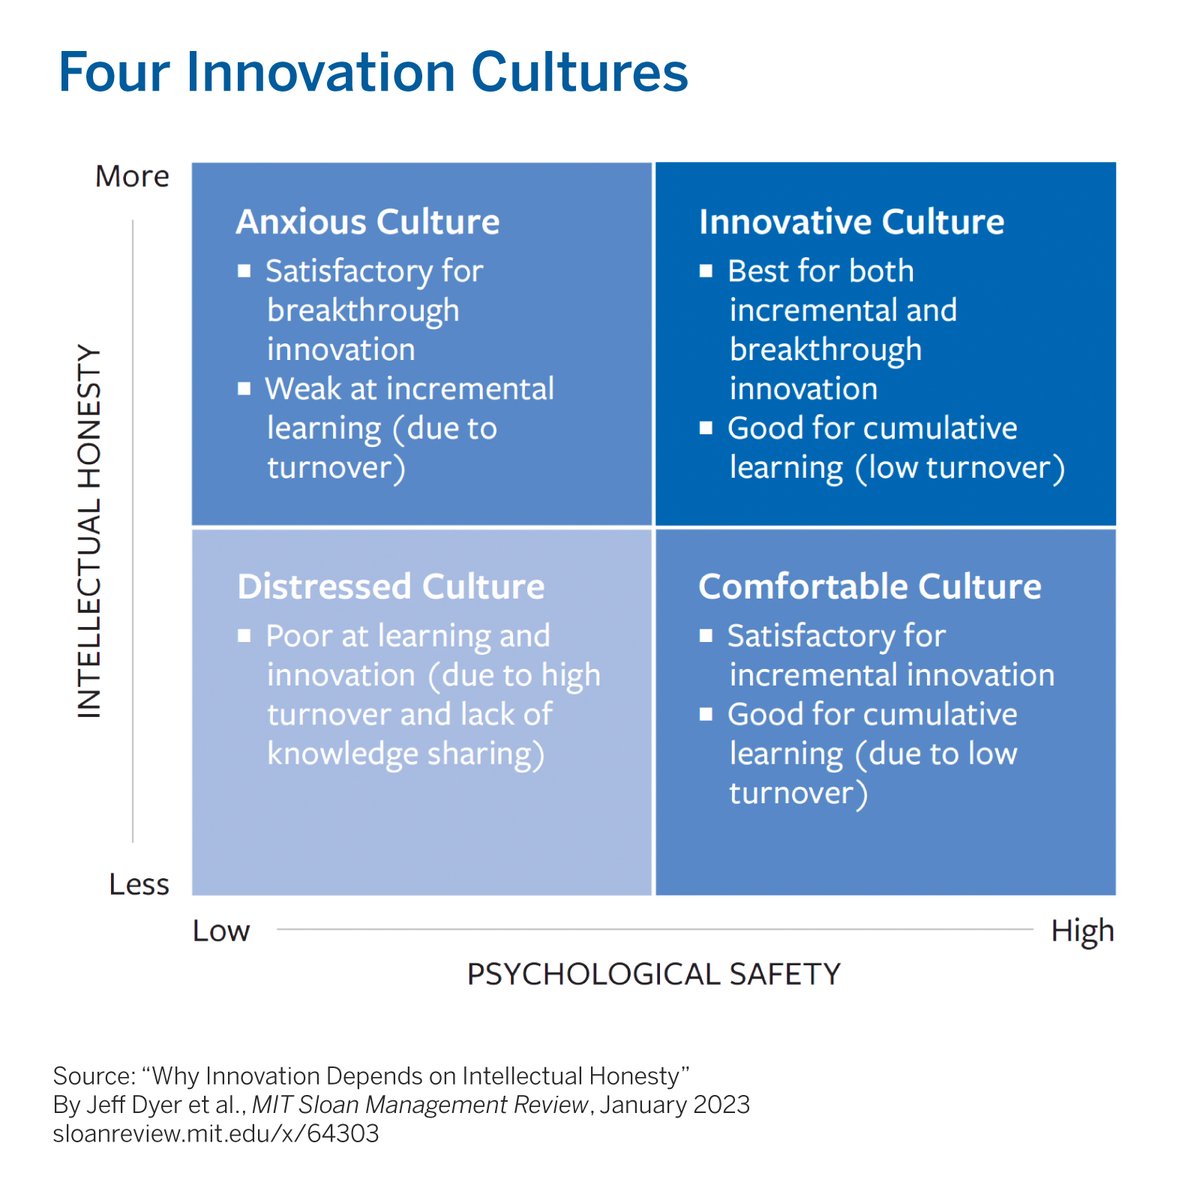 There are 4 basic team cultures, with different emphases on psychological safety and different emphases on intellectual honesty. Each culture supports or discourages learning and innovation to different degrees. mitsmr.com/3XyG09v